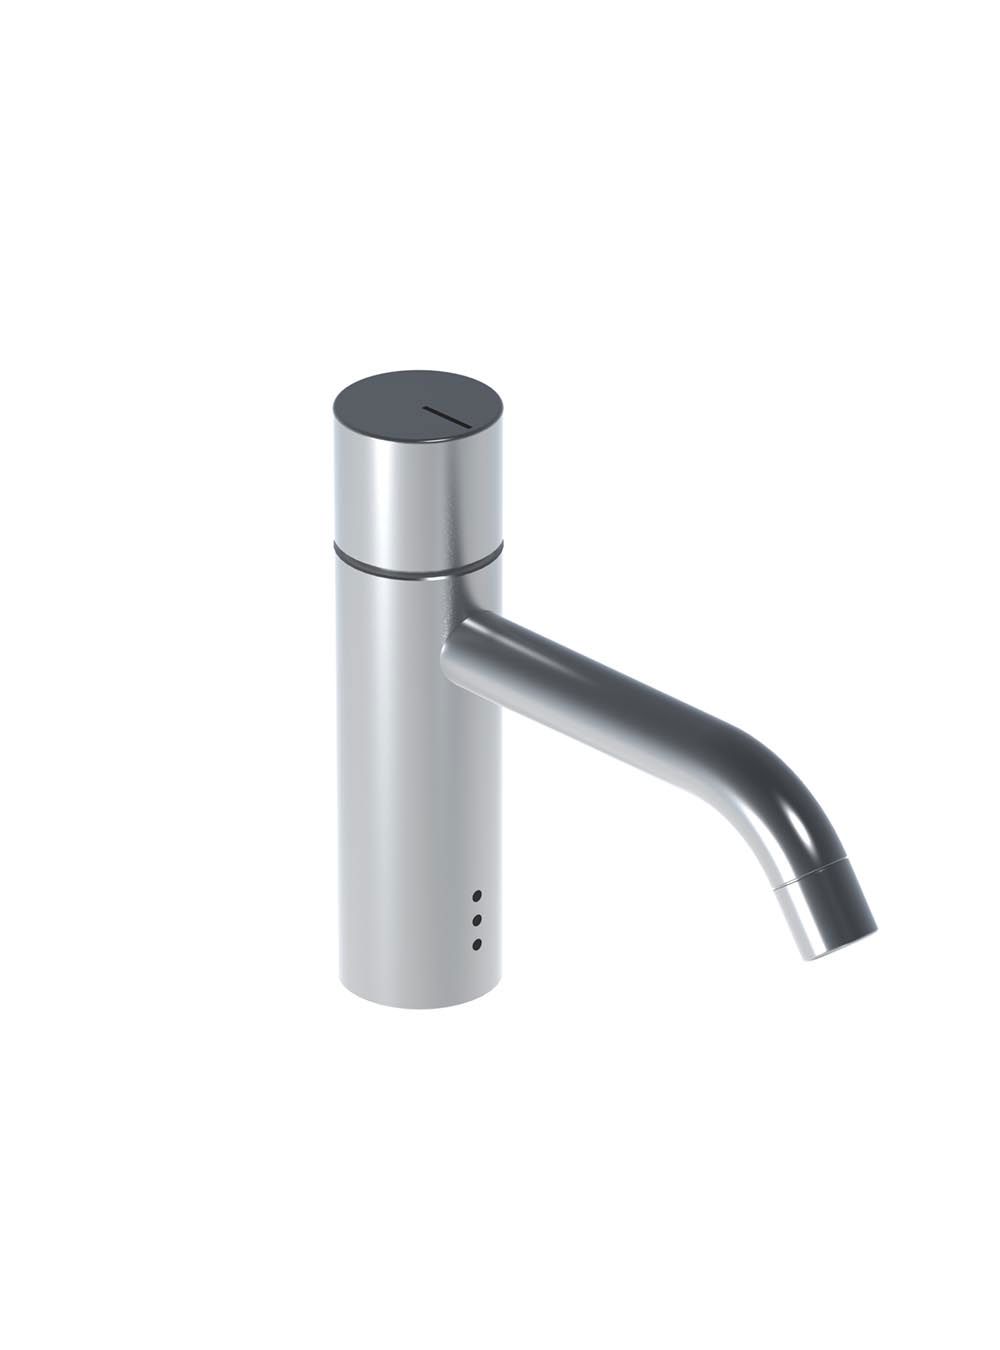 HV1EN/150: Basin mixer with on-off sensor for ‘hands free’ operation. Spout projection 150 mm.Incl. an external